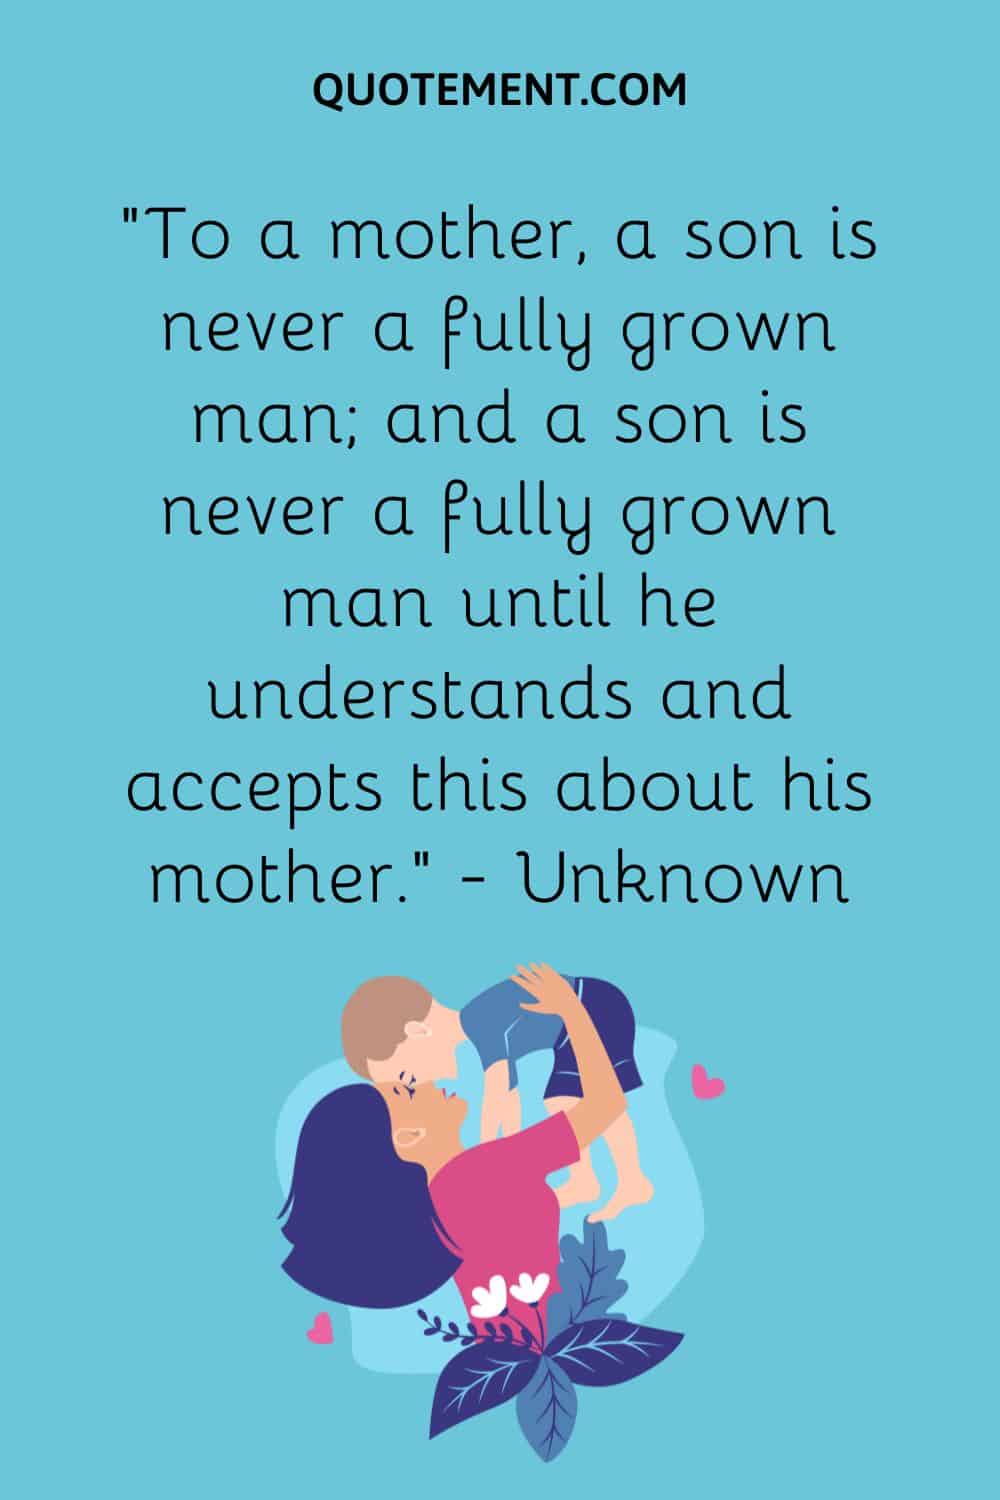 “To a mother, a son is never a fully grown man; and a son is never a fully grown man until he understands and accepts this about his mother.” — Unknown